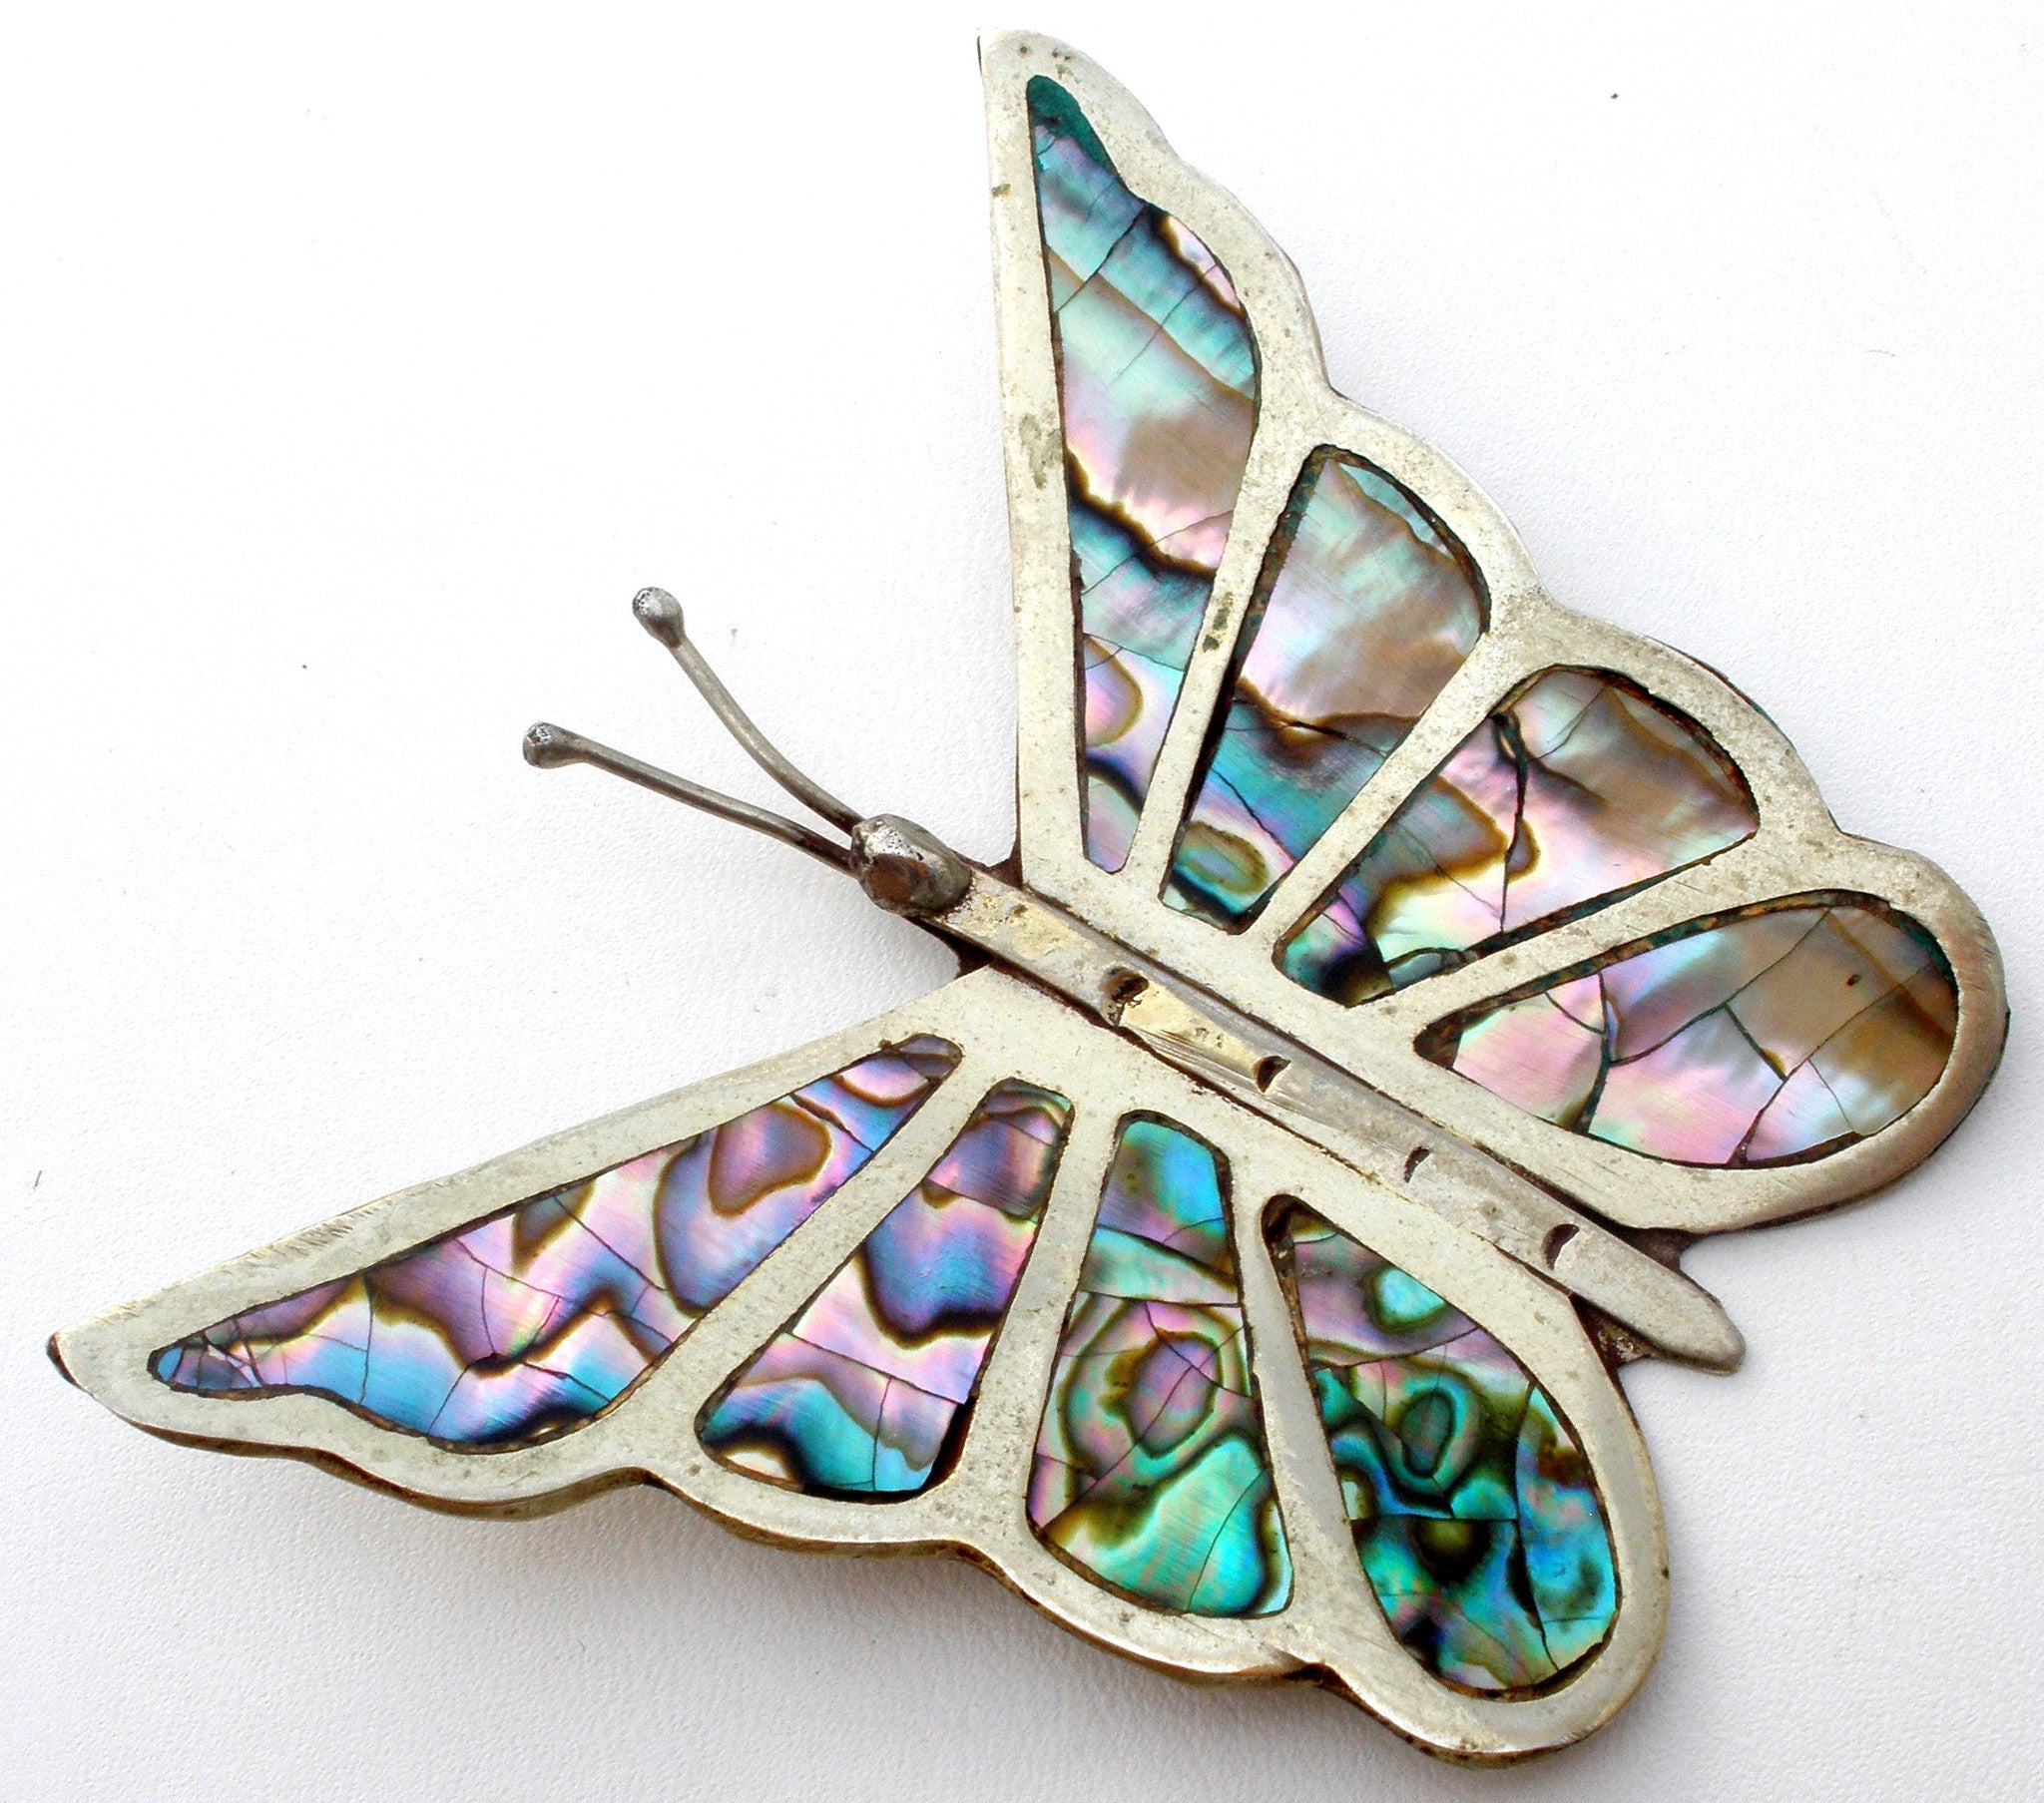 Huge Tomato Butterfly Mother of Pearl Brooch Abalone Shell Freshwater Pearl Brooch Pin Vintage Jewelry